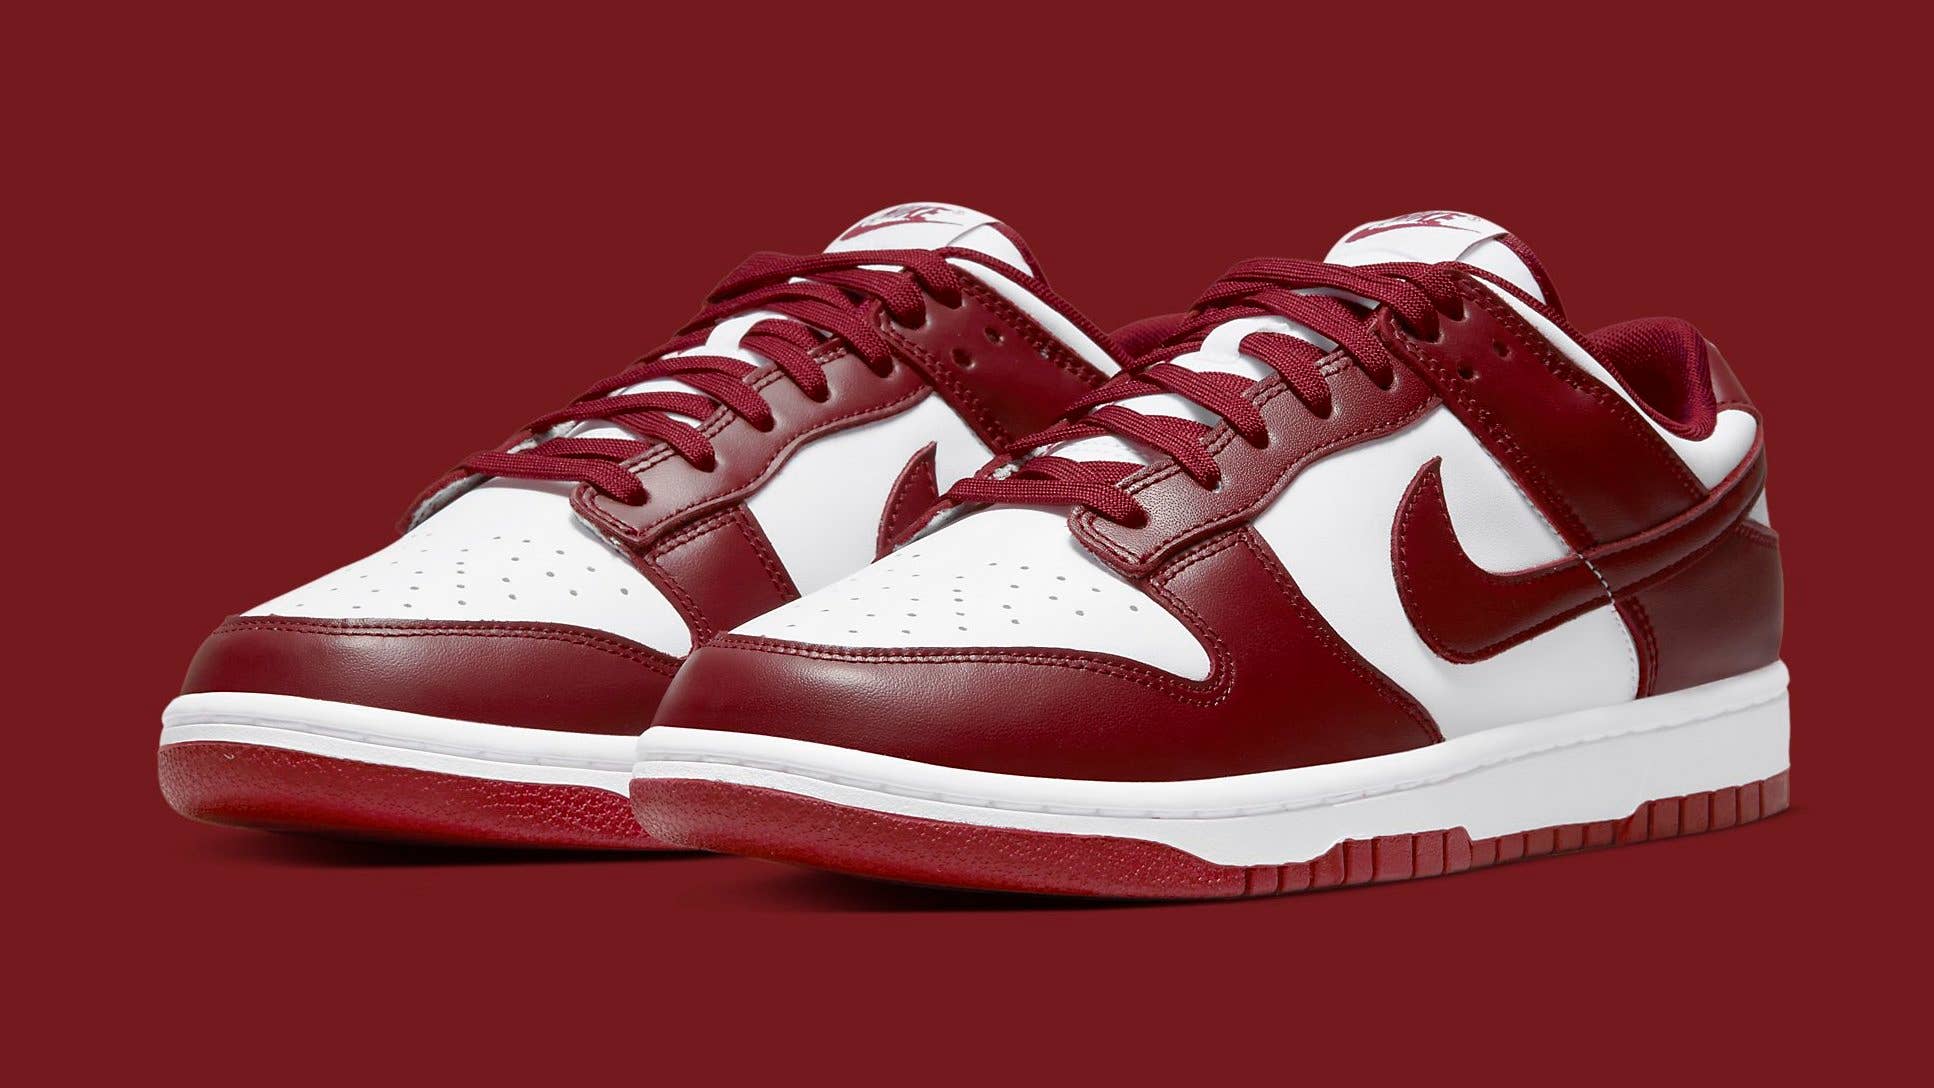 Best Look Yet at the 'Team Red' Nike Dunk Lows